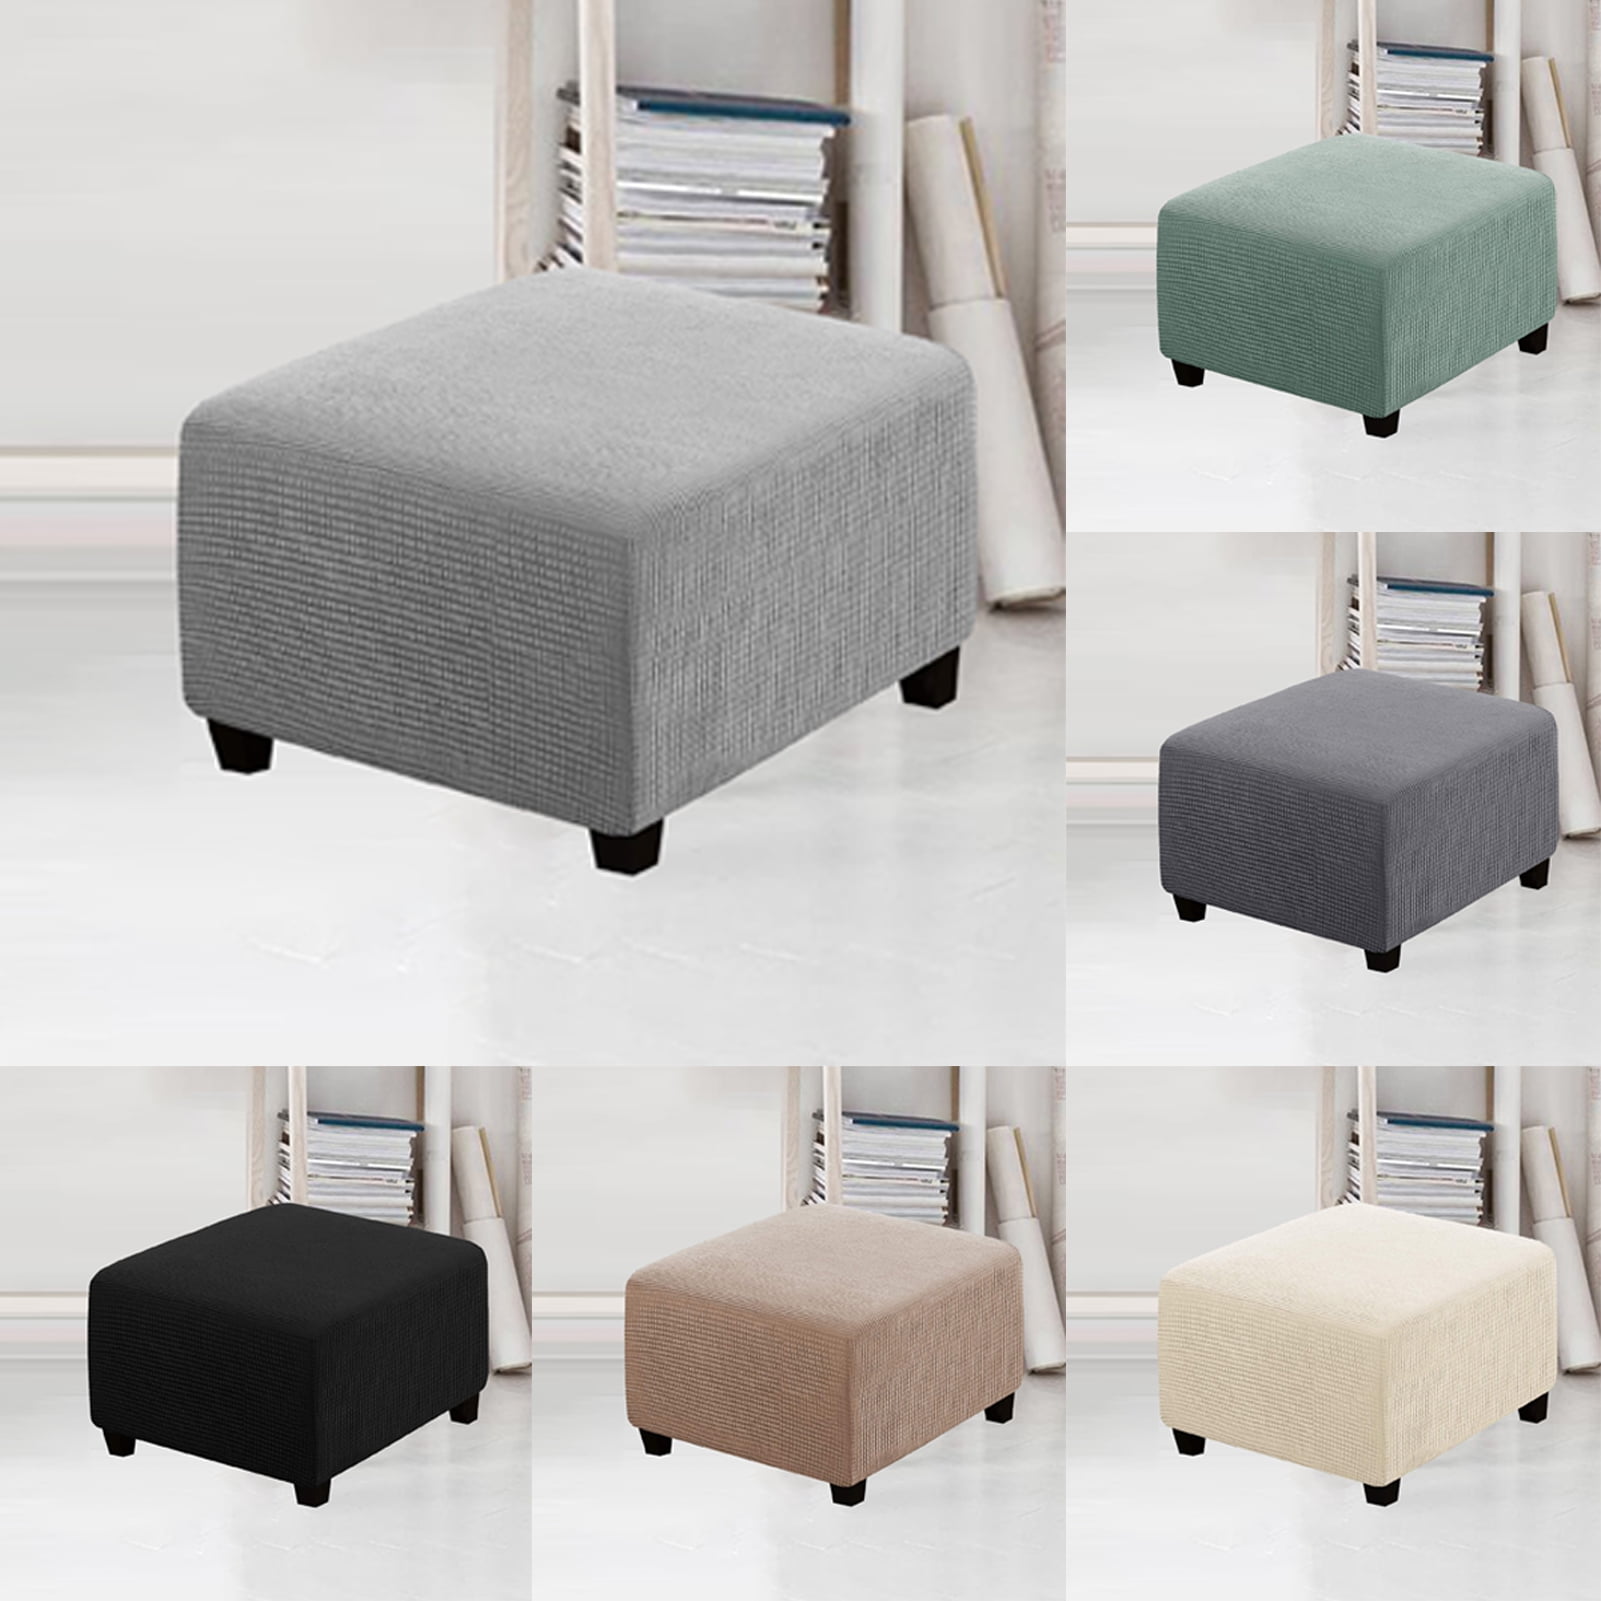 Stretch Stool Cover Rectangular Chair Seat Cover Washable Cushion Slipcover